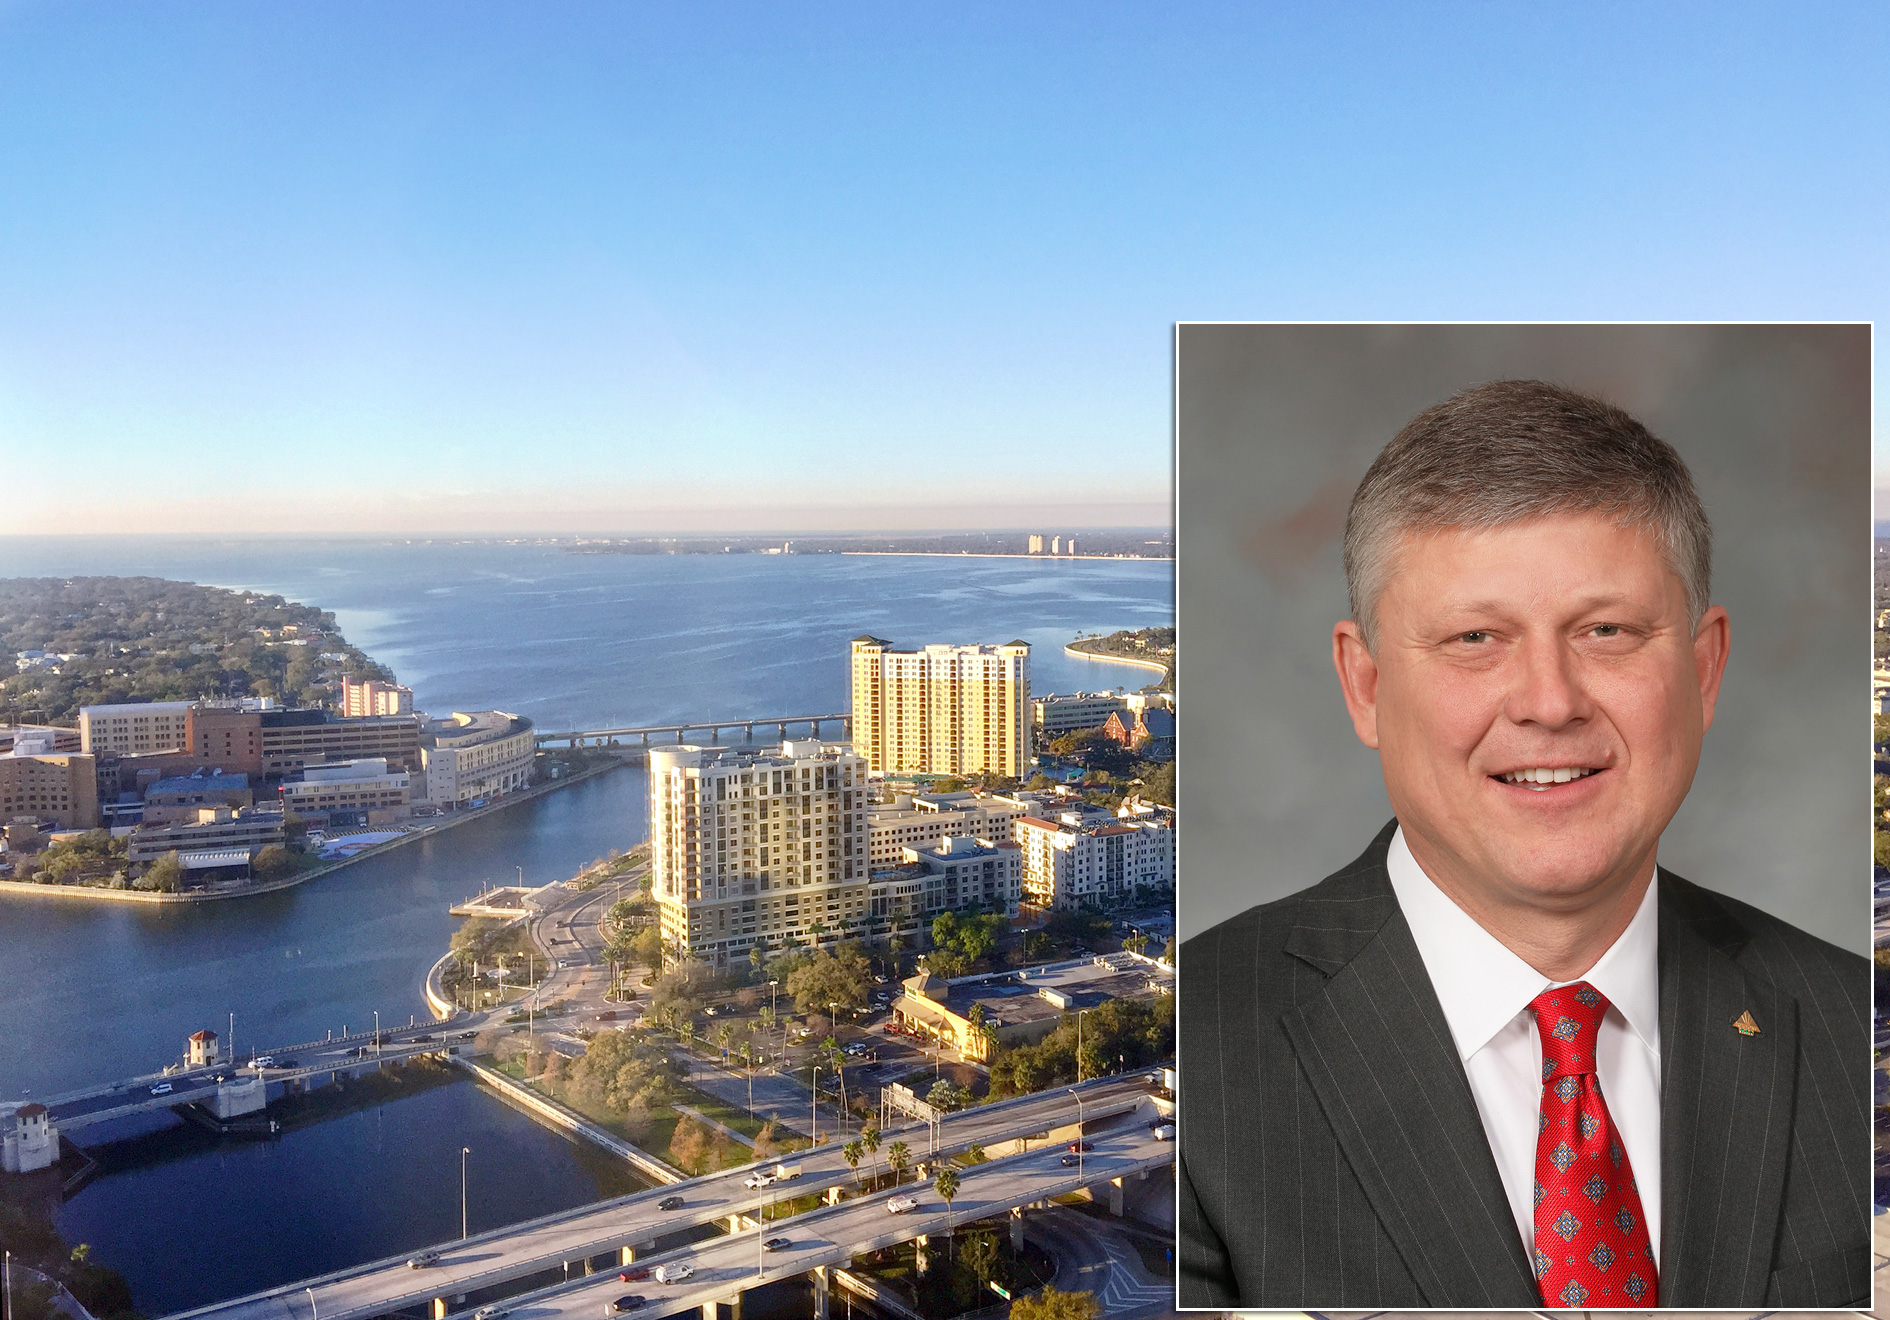 Tampa skyline and photo of business man